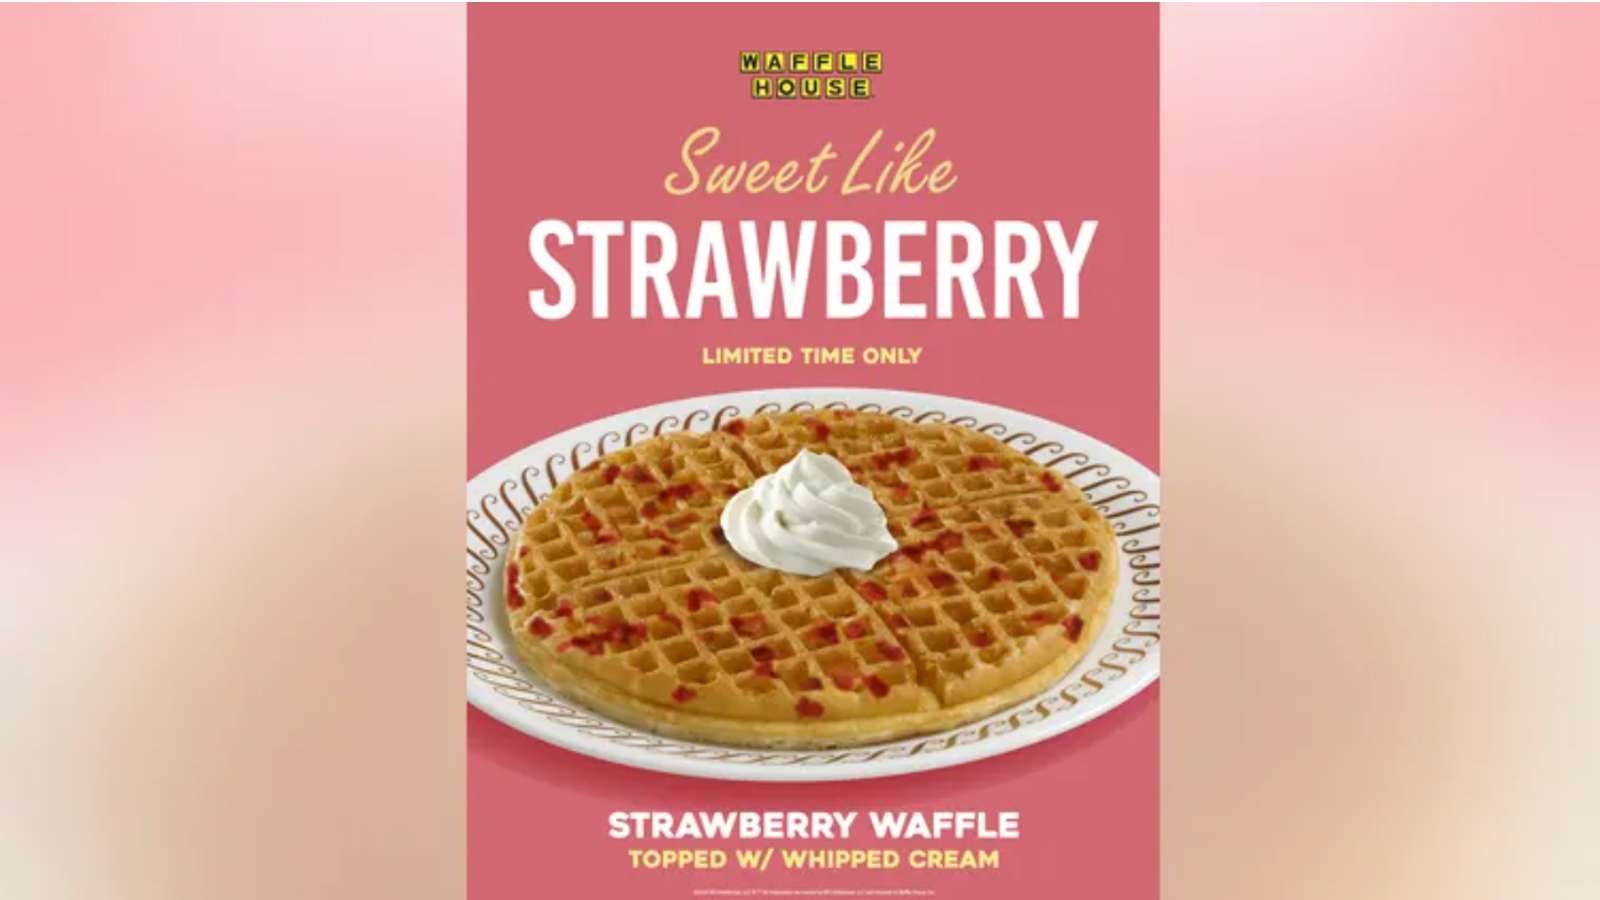 Waffle House strawberry flavor